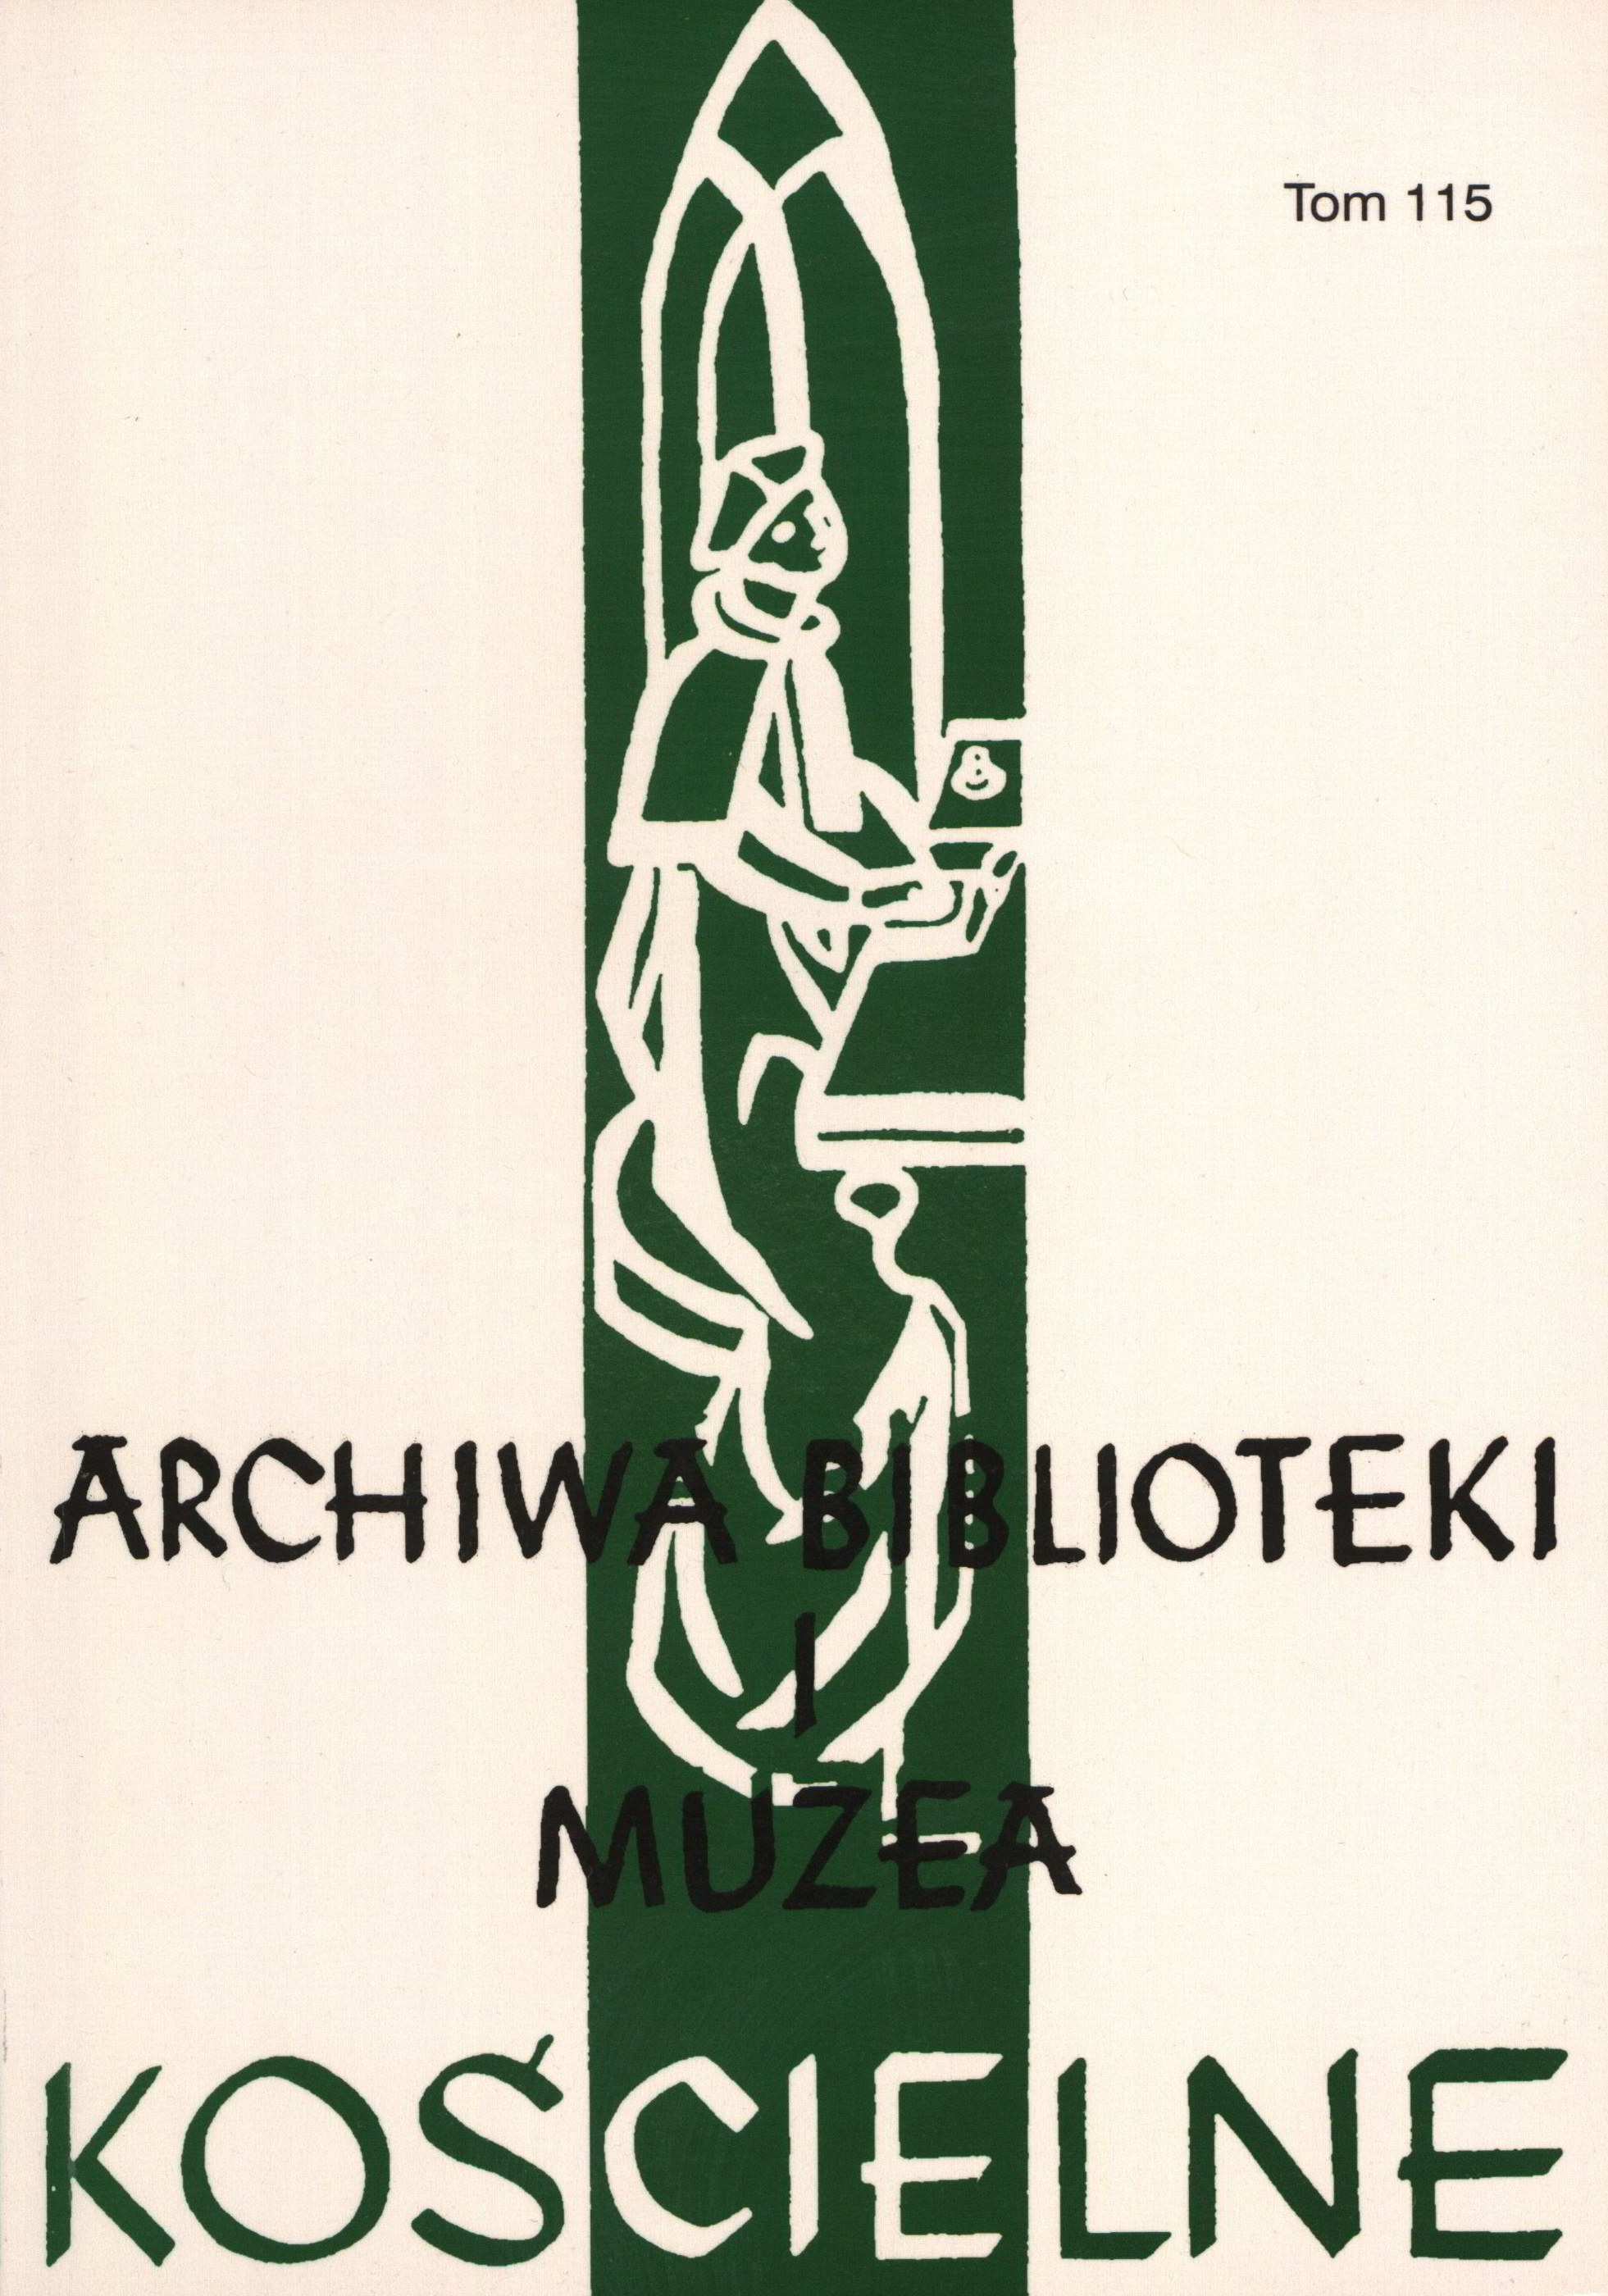 Documents and diplomas of the Poor Clares convent in Gniezno. Methods of authenticating documents in the practice of the convent of St. Clare. Inventory Cover Image